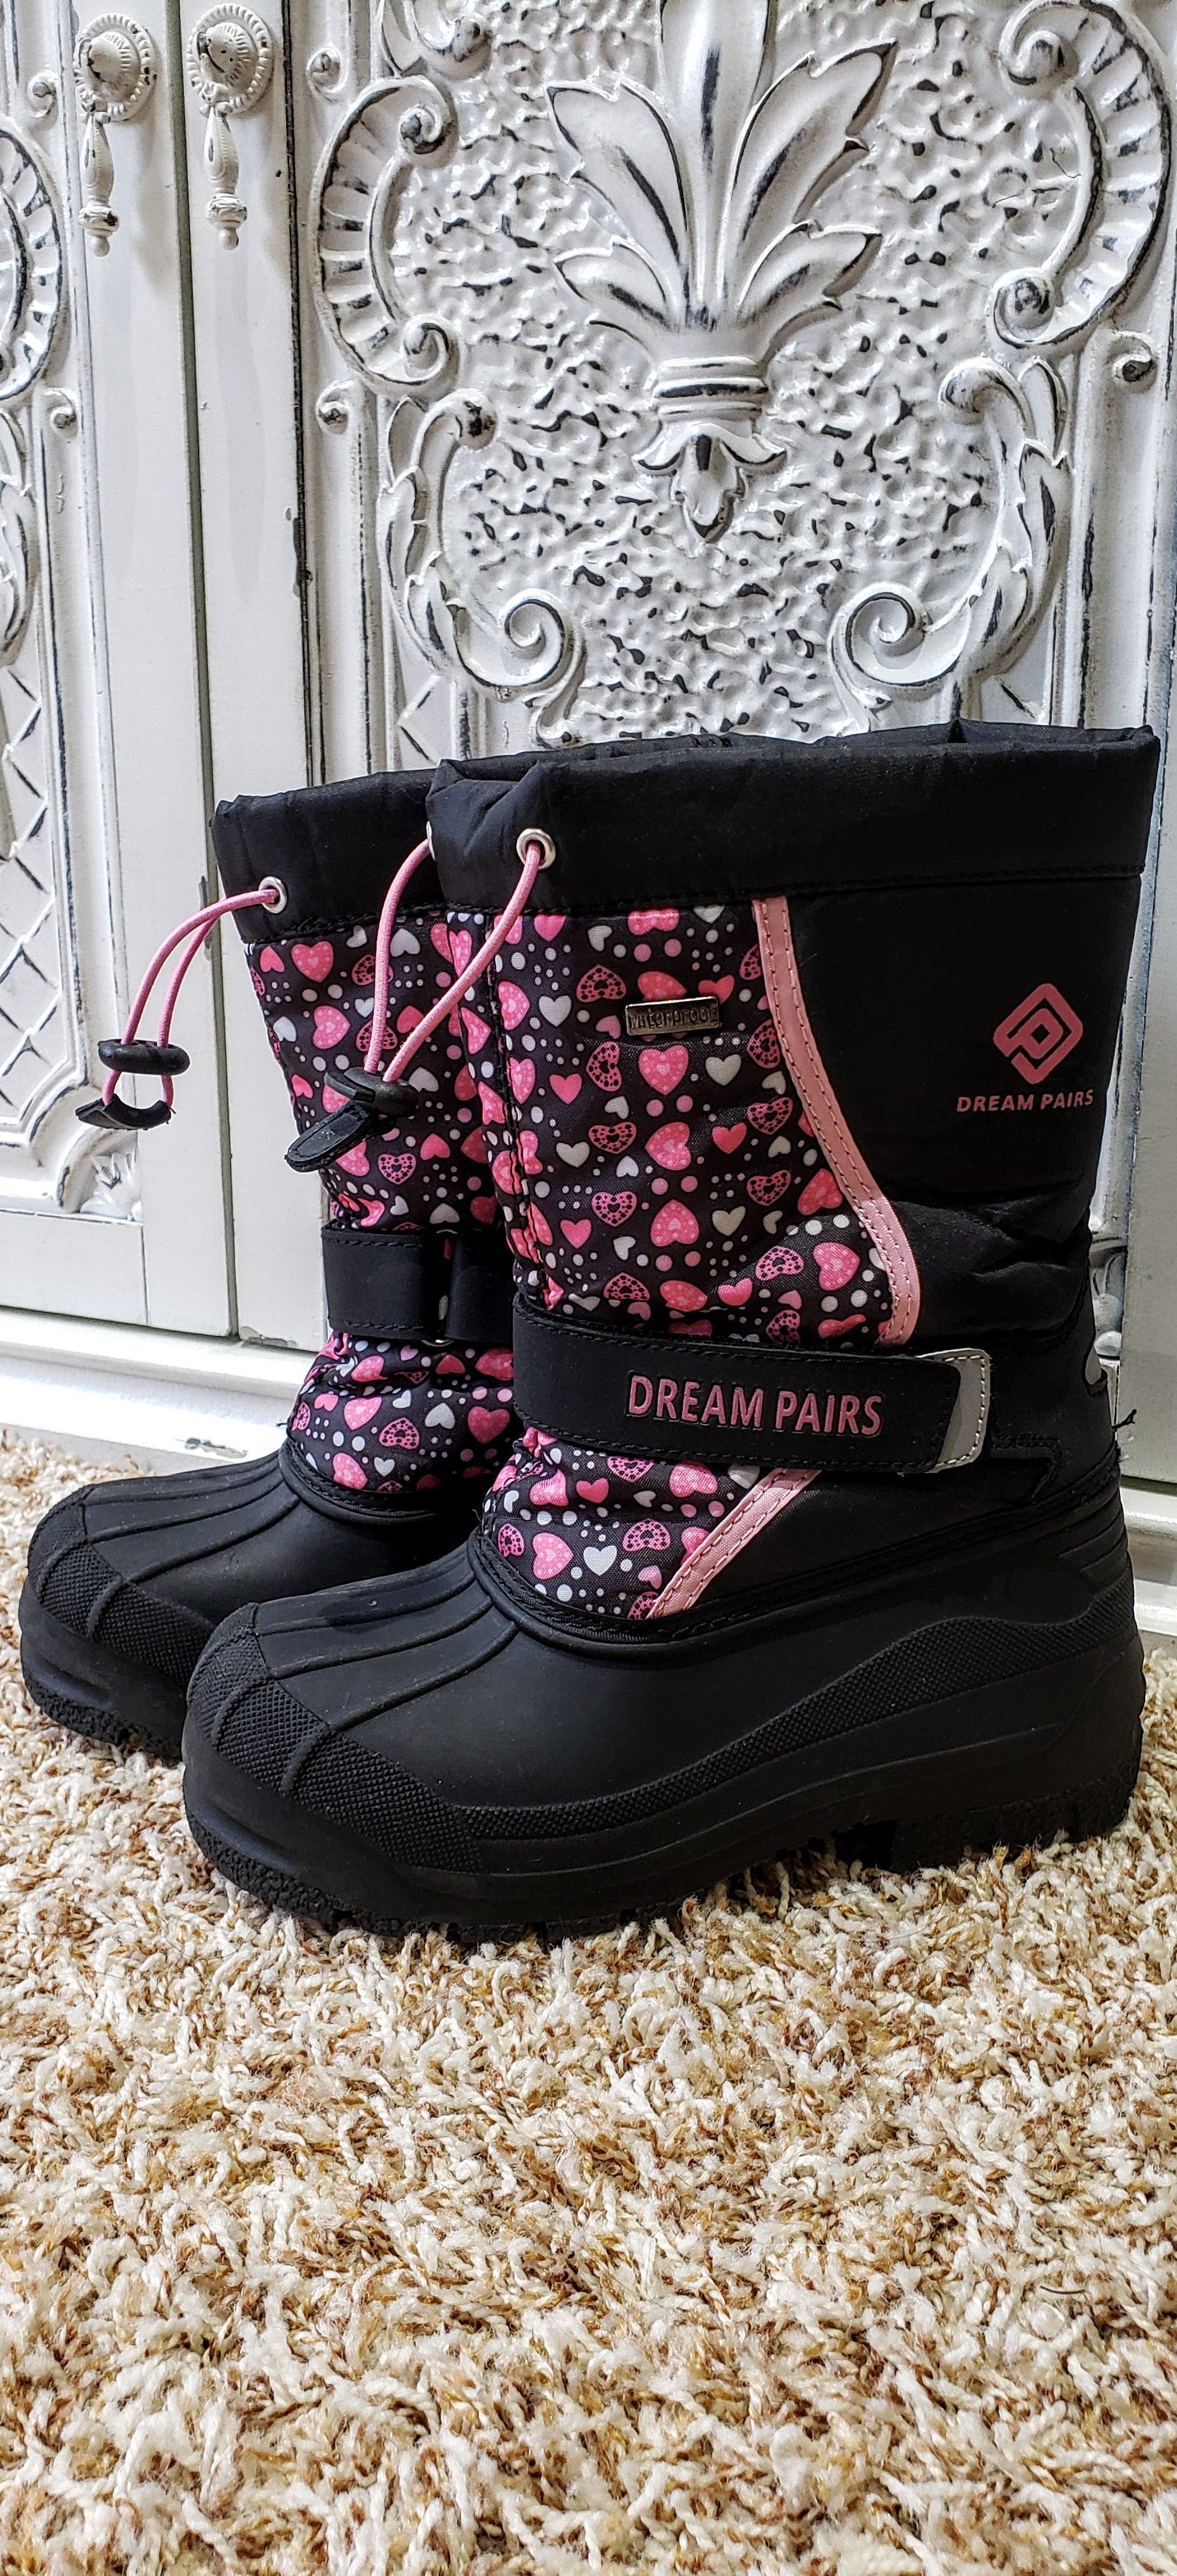 DREAM PAIRS GIRLS SNOW BOOTS SIZE 13